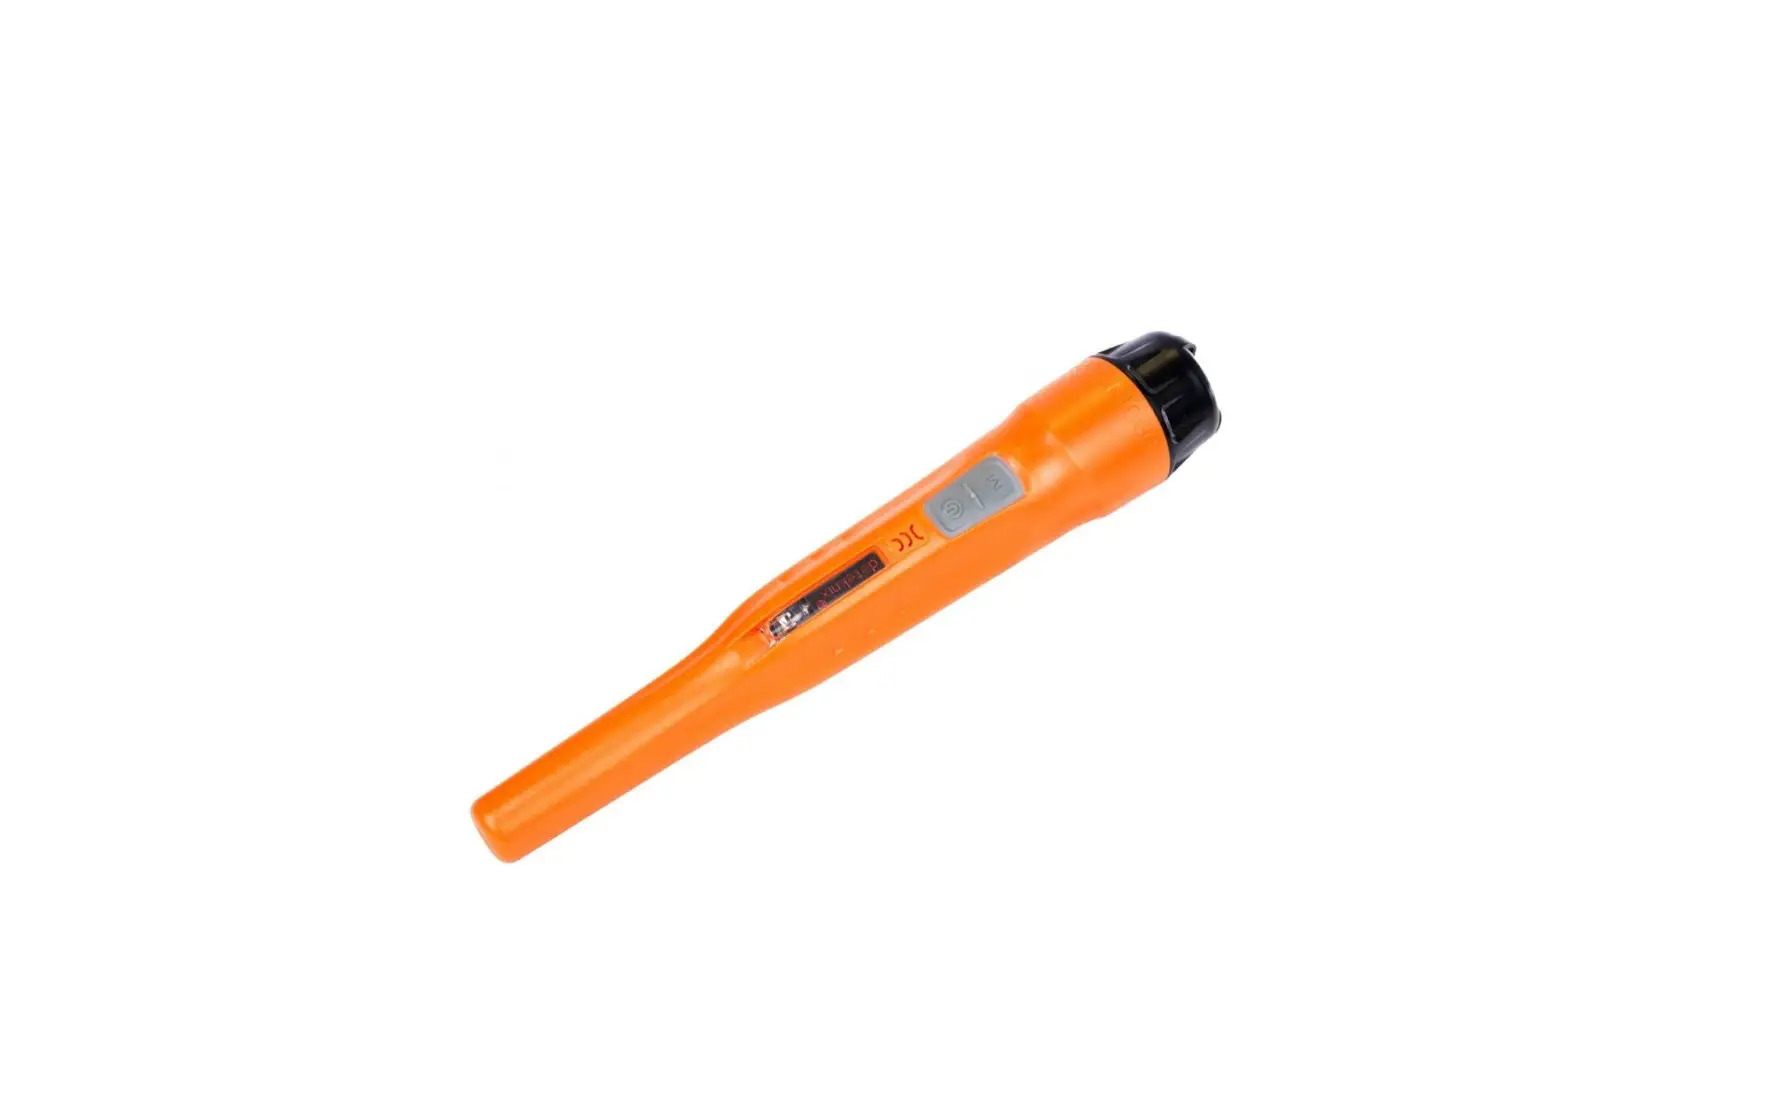 Xpointer Waterproof Pinpointer